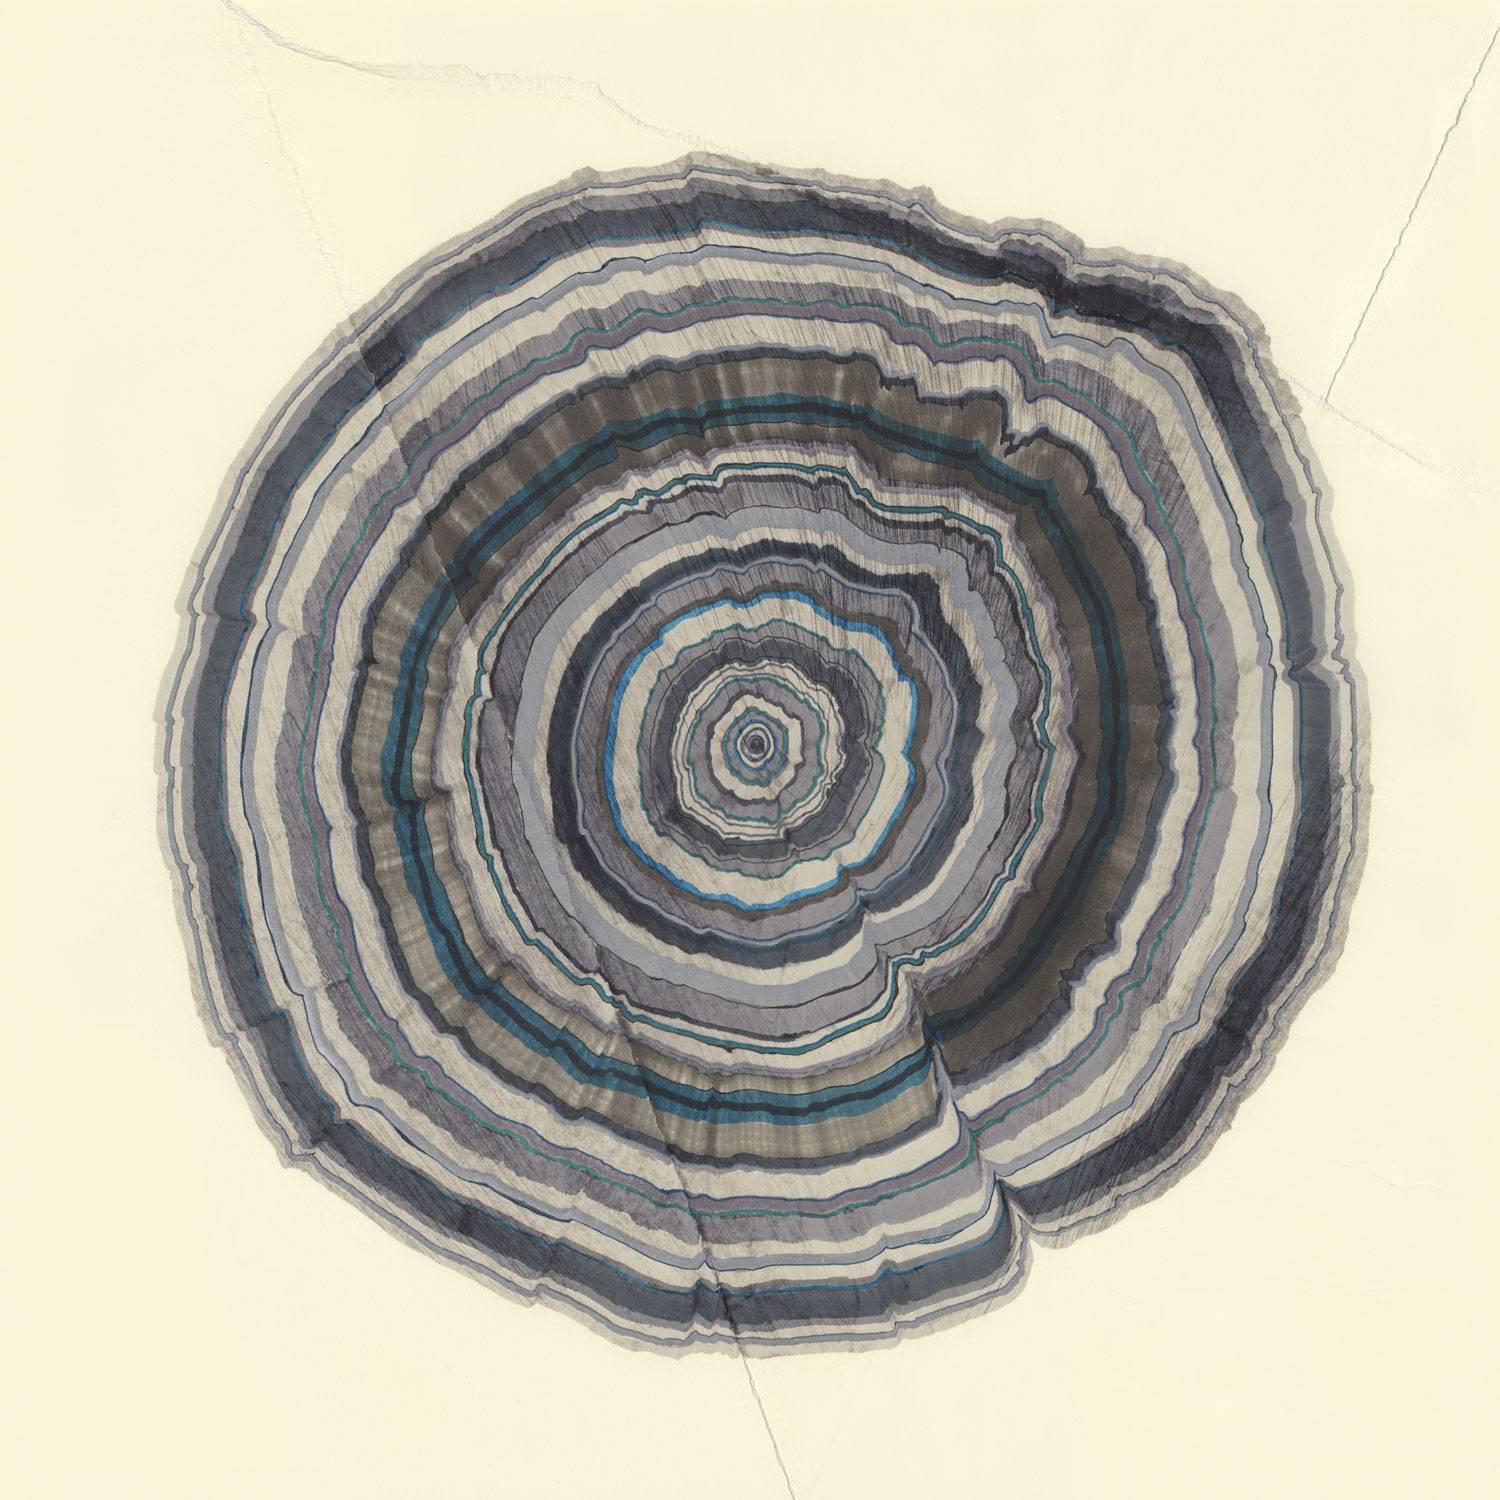 Steven L. Anderson
63 Years, 2015
marker and pen on paper
16 x 16 inches

The Tree Rings artworks are made on paper which is torn and reassembled, scratched, and sanded. From there, they are built in perhaps the same way that trees grow: starting in